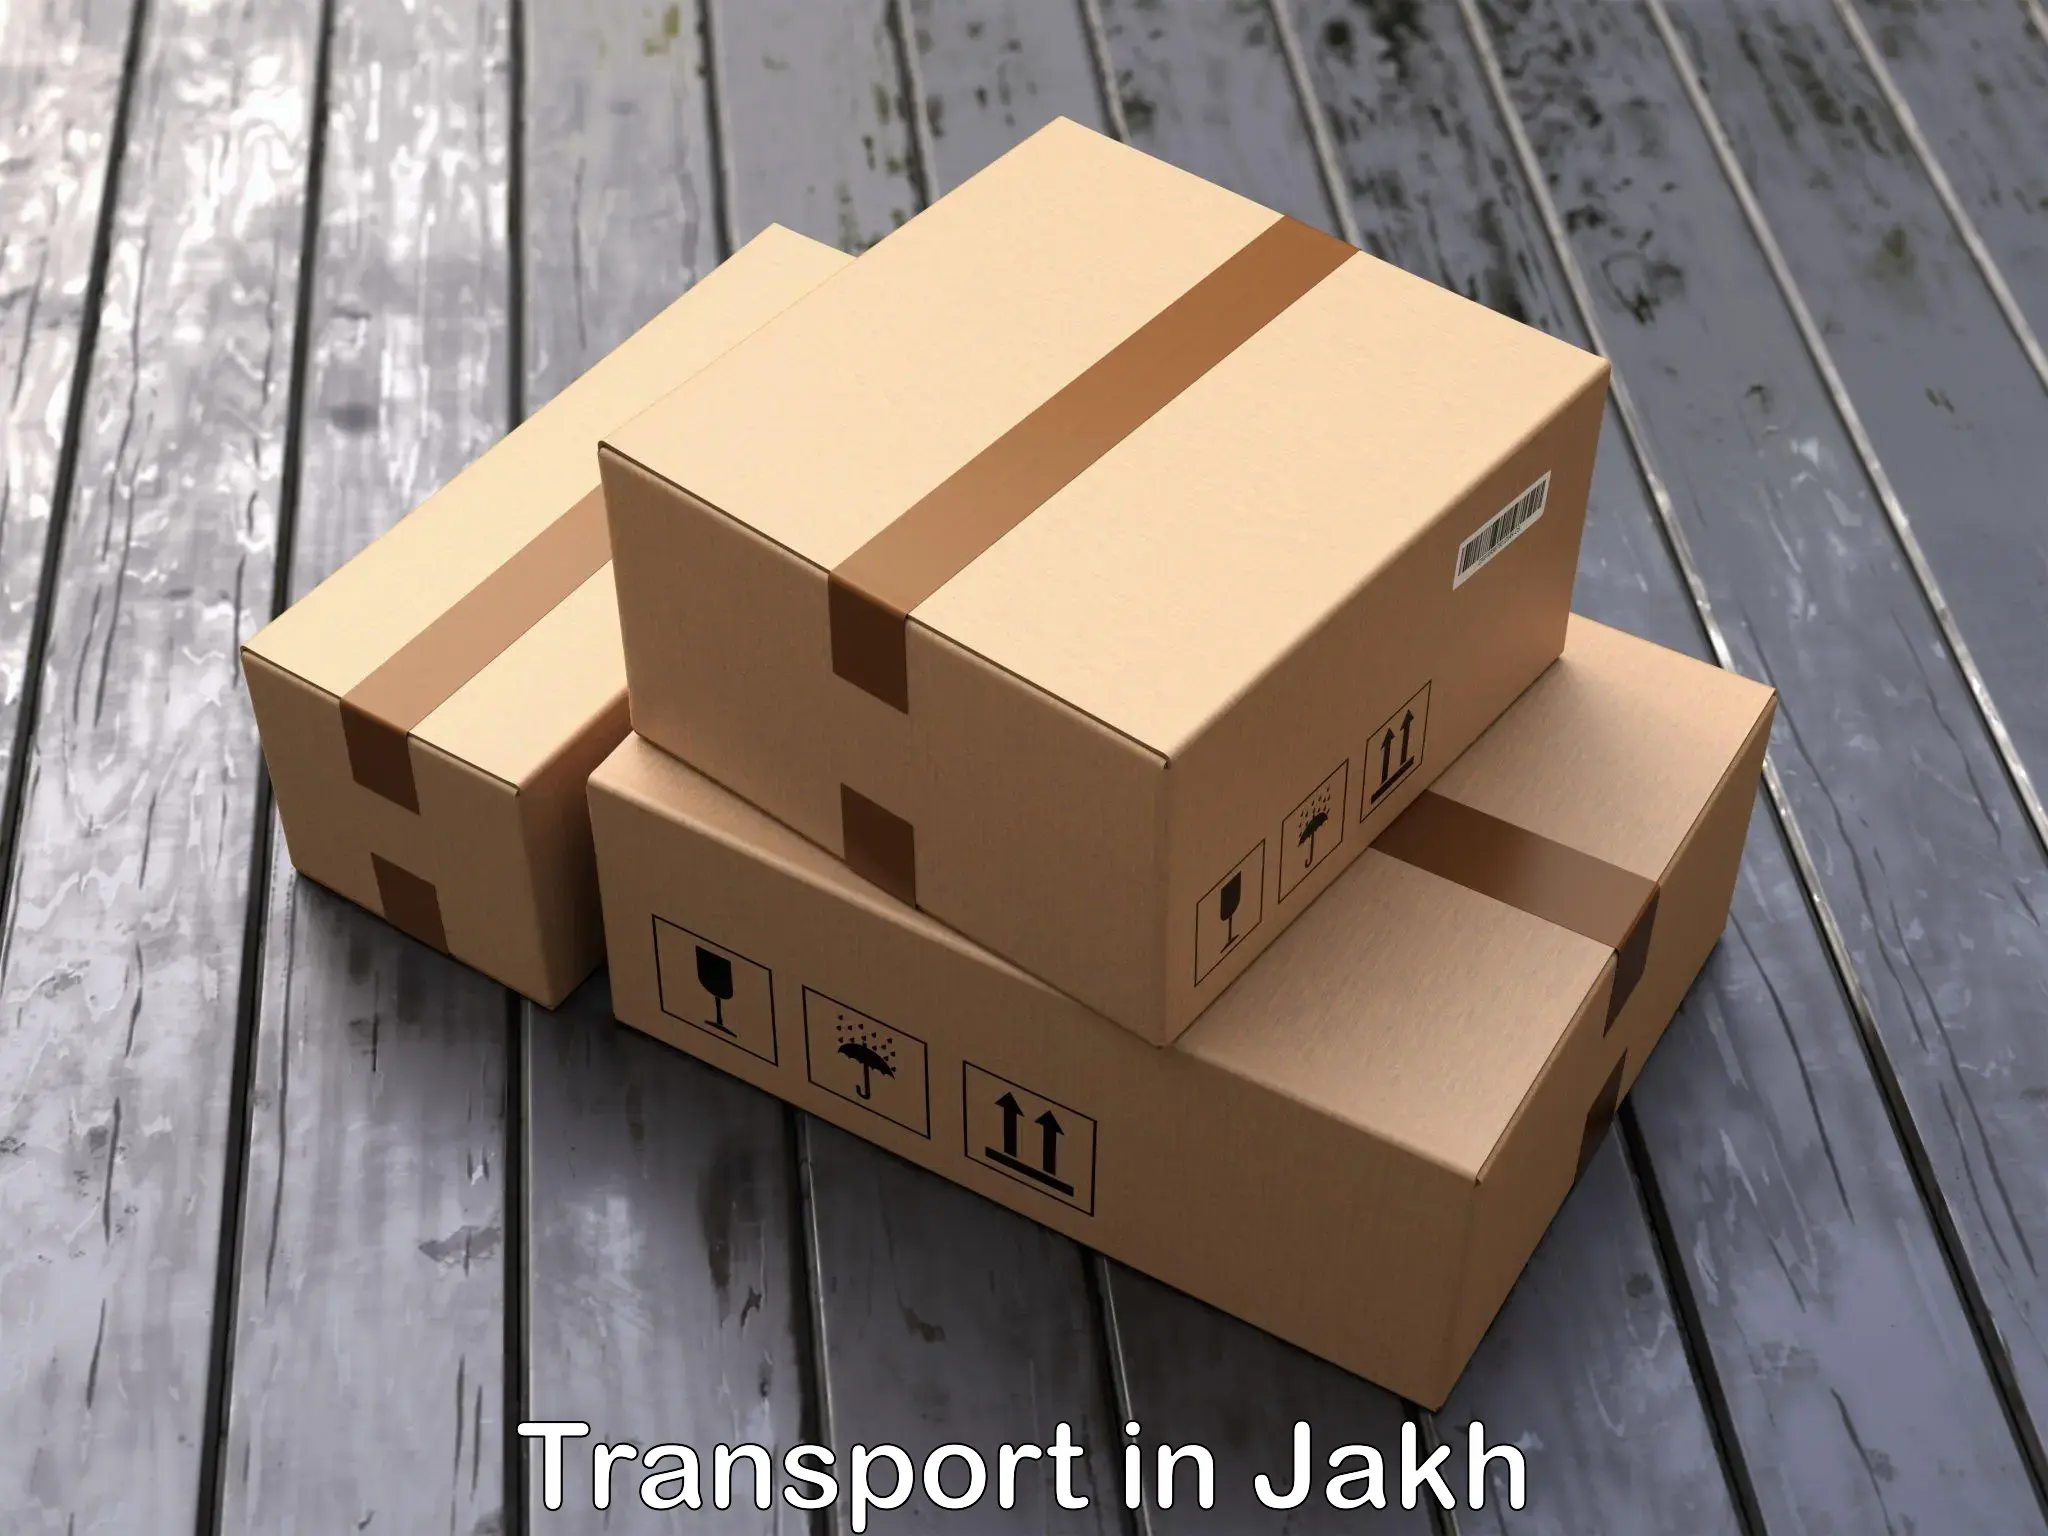 Daily transport service in Jakh